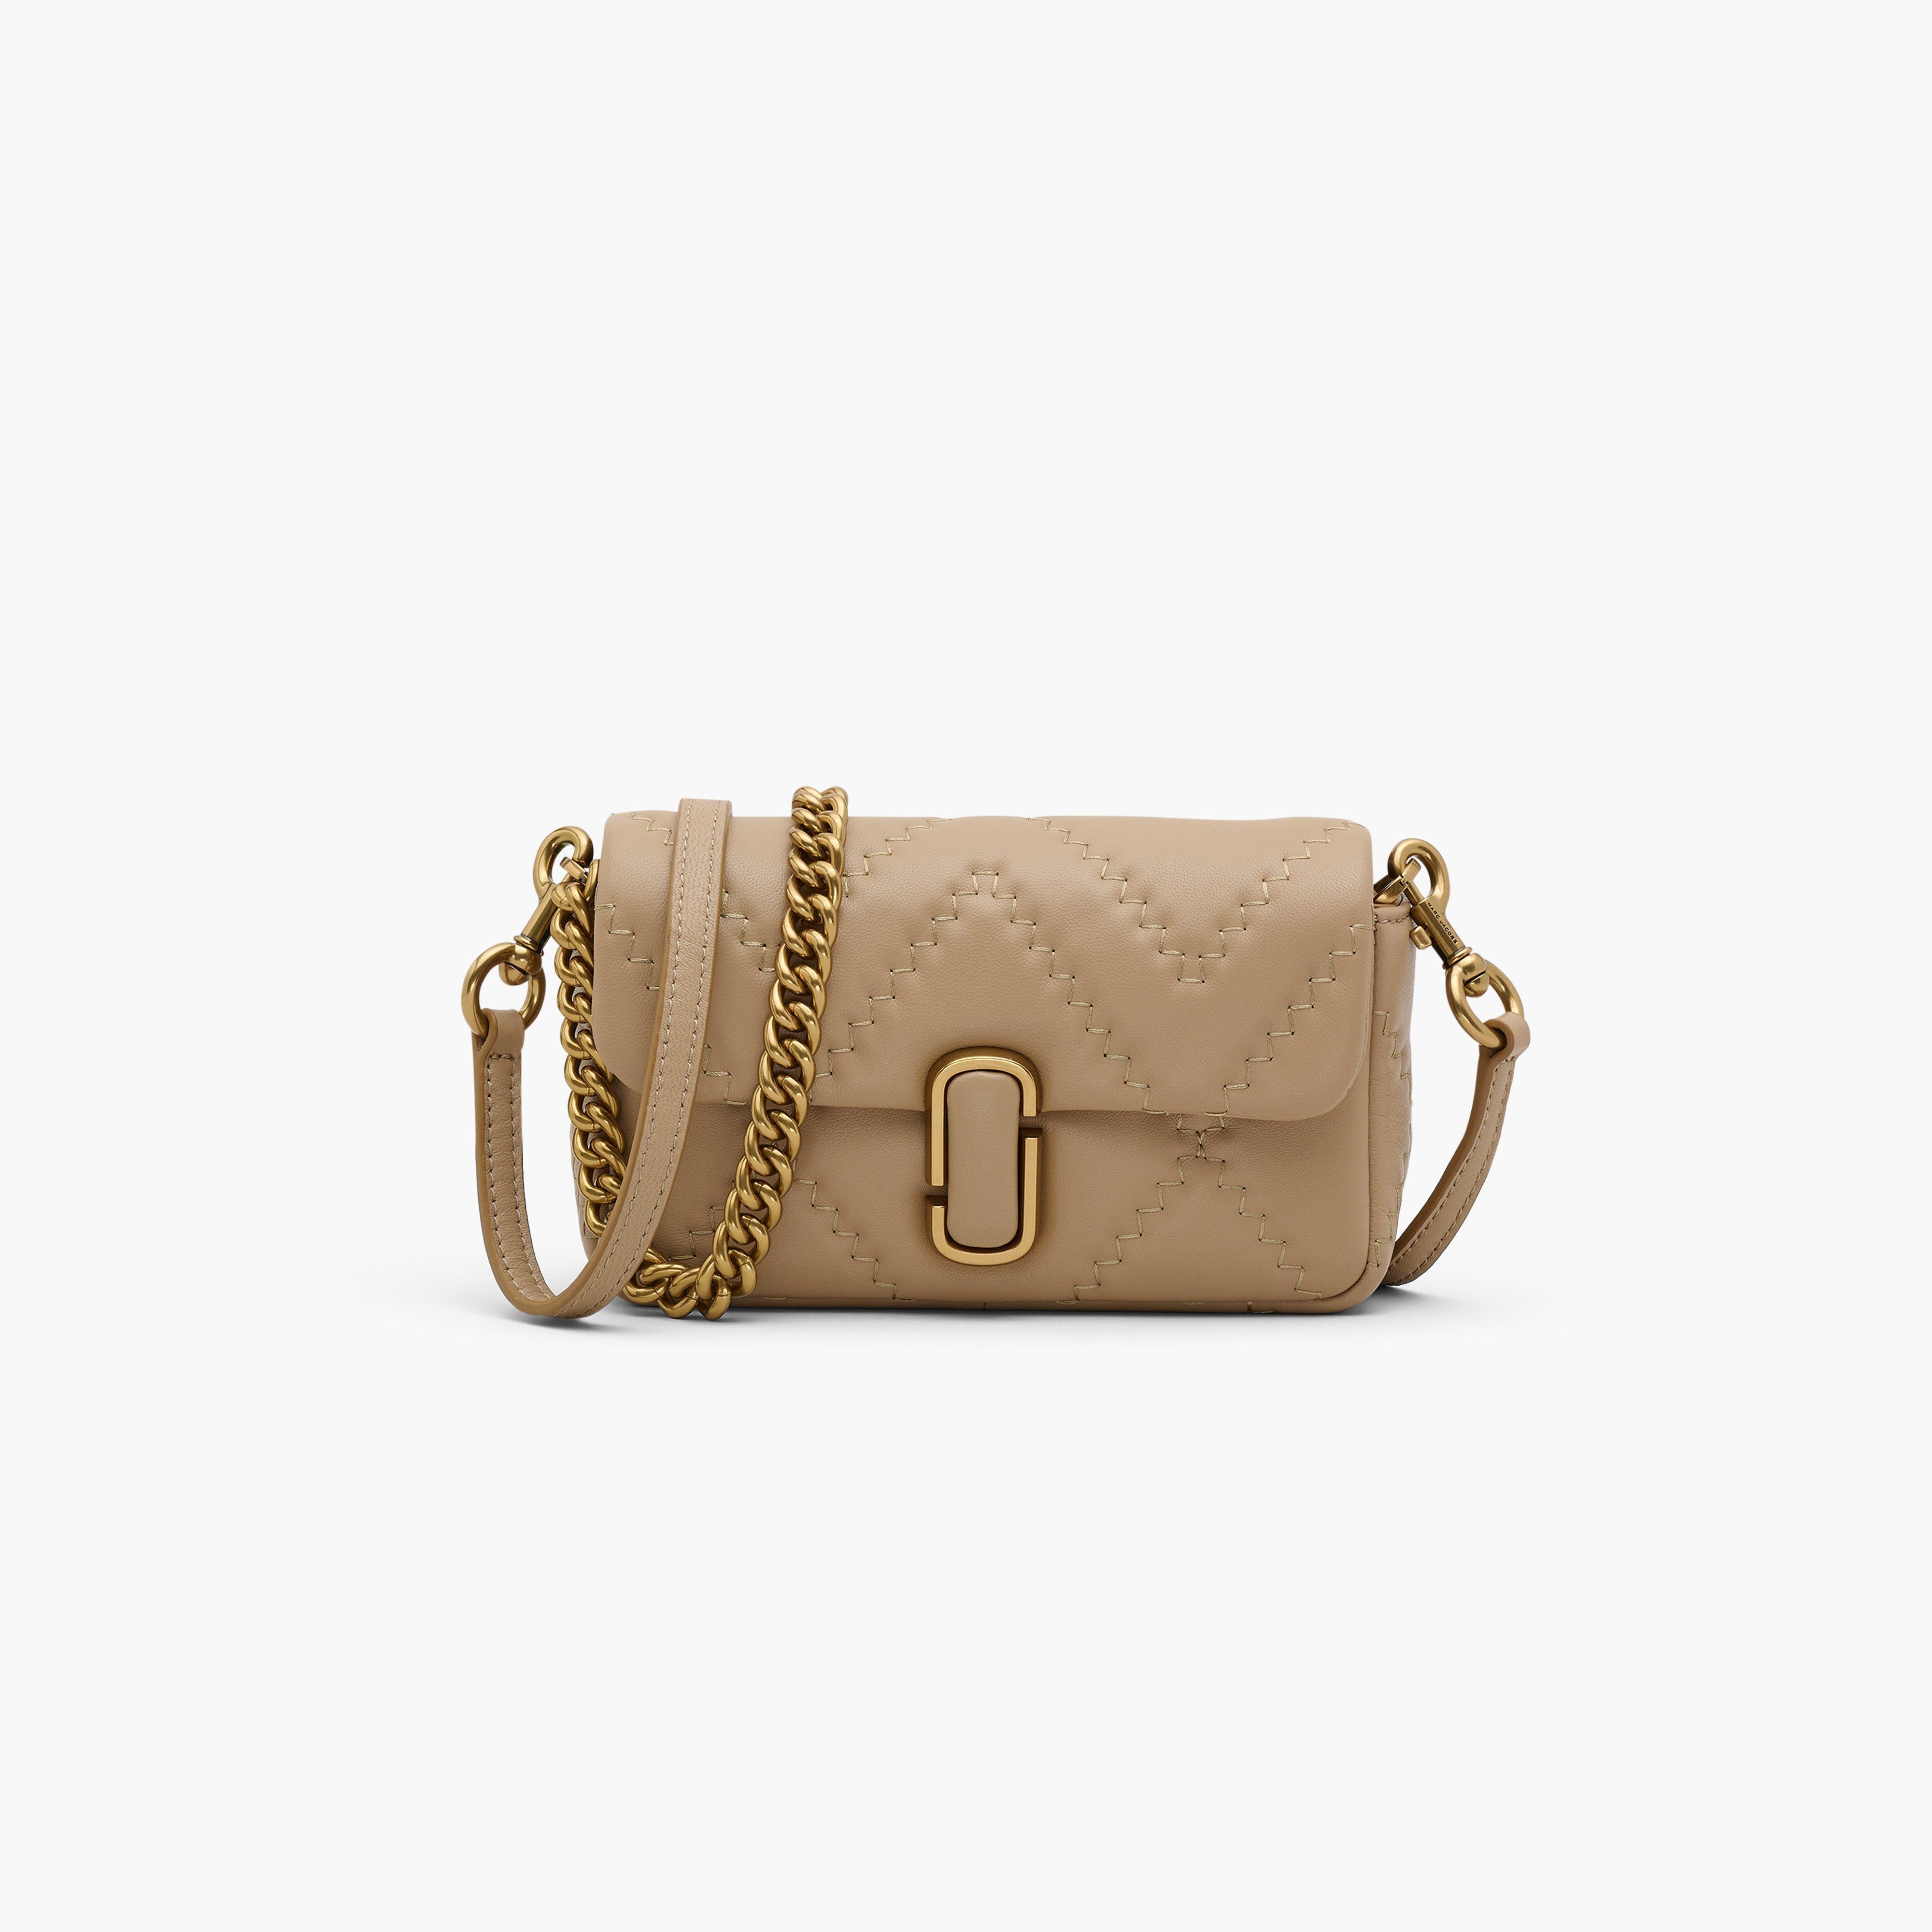 THE QUILTED LEATHER J MARC MINI BAG - 1